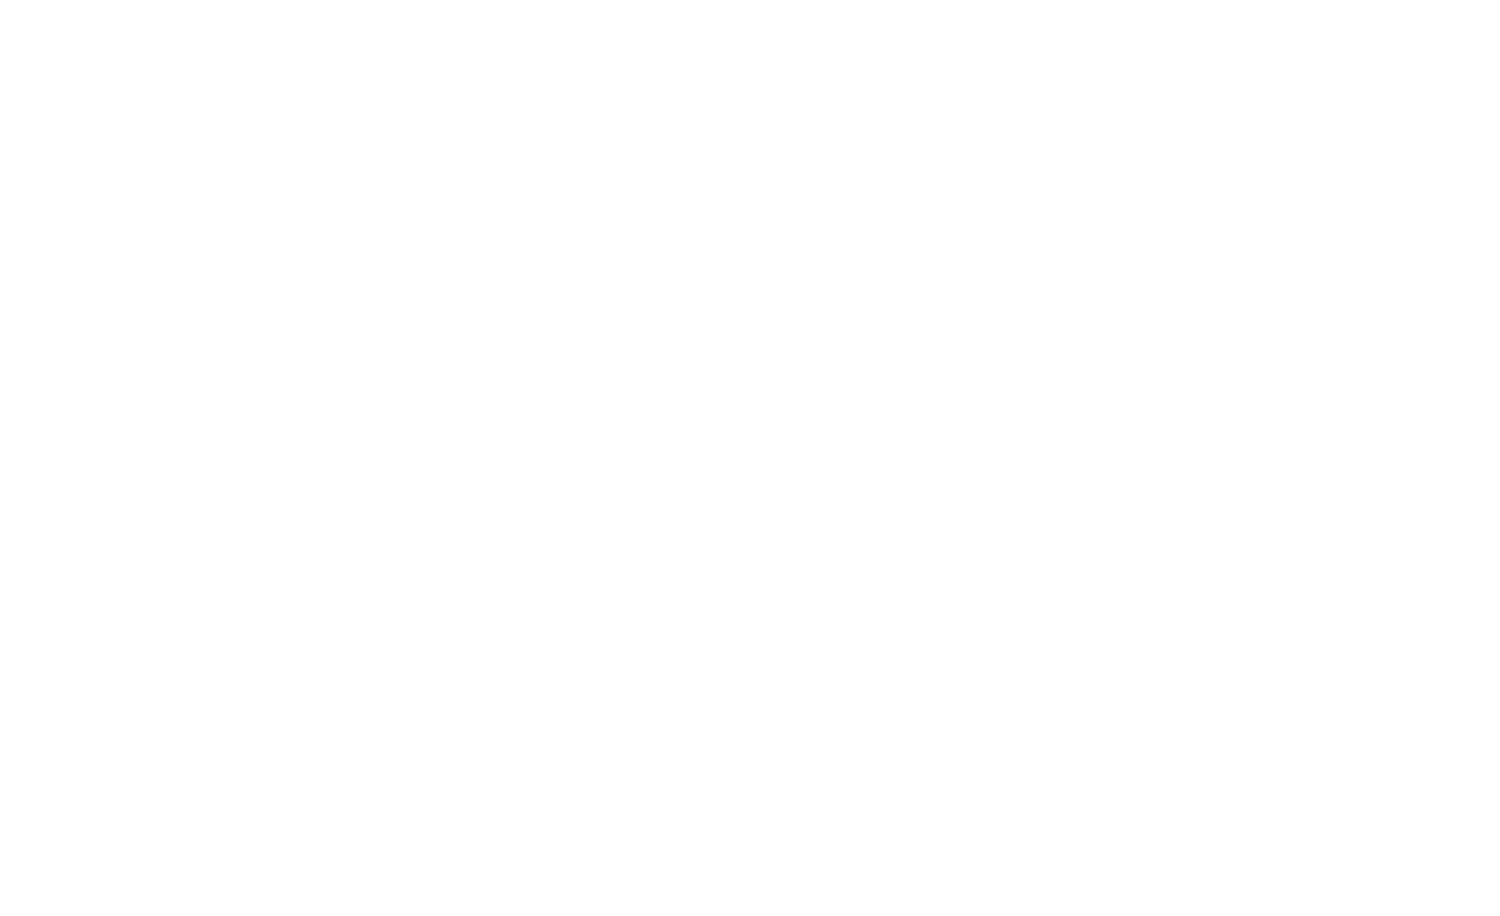 Vote Yes to Save Crebilly